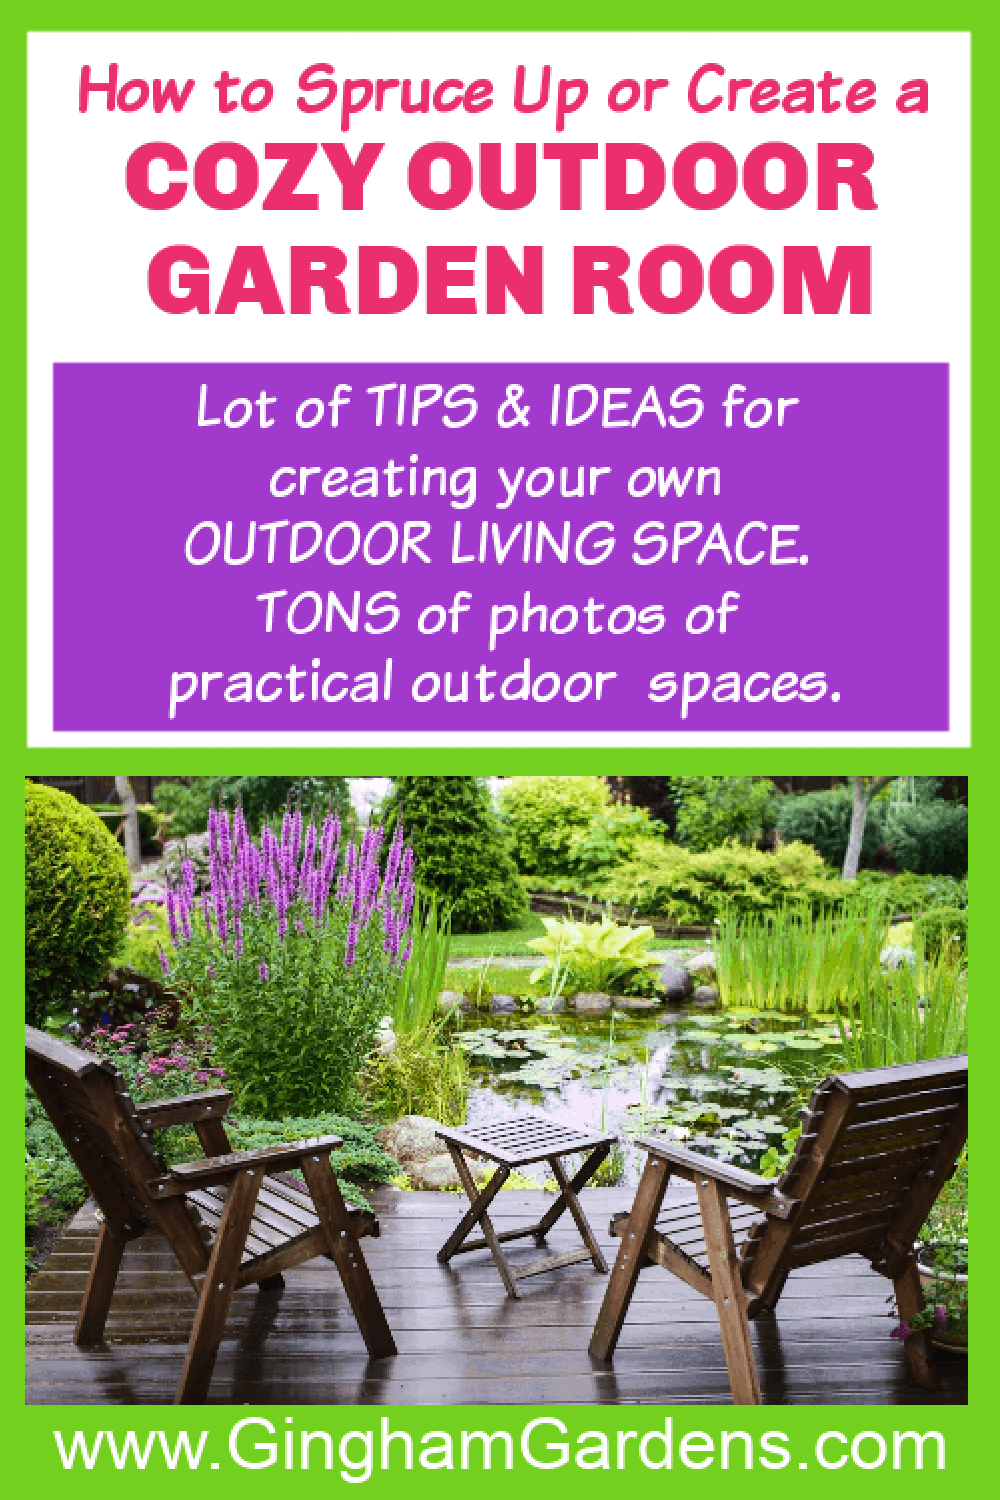 Image of a Garden Room with text overlay - How to spruce up or create a cozy outdoor garden room